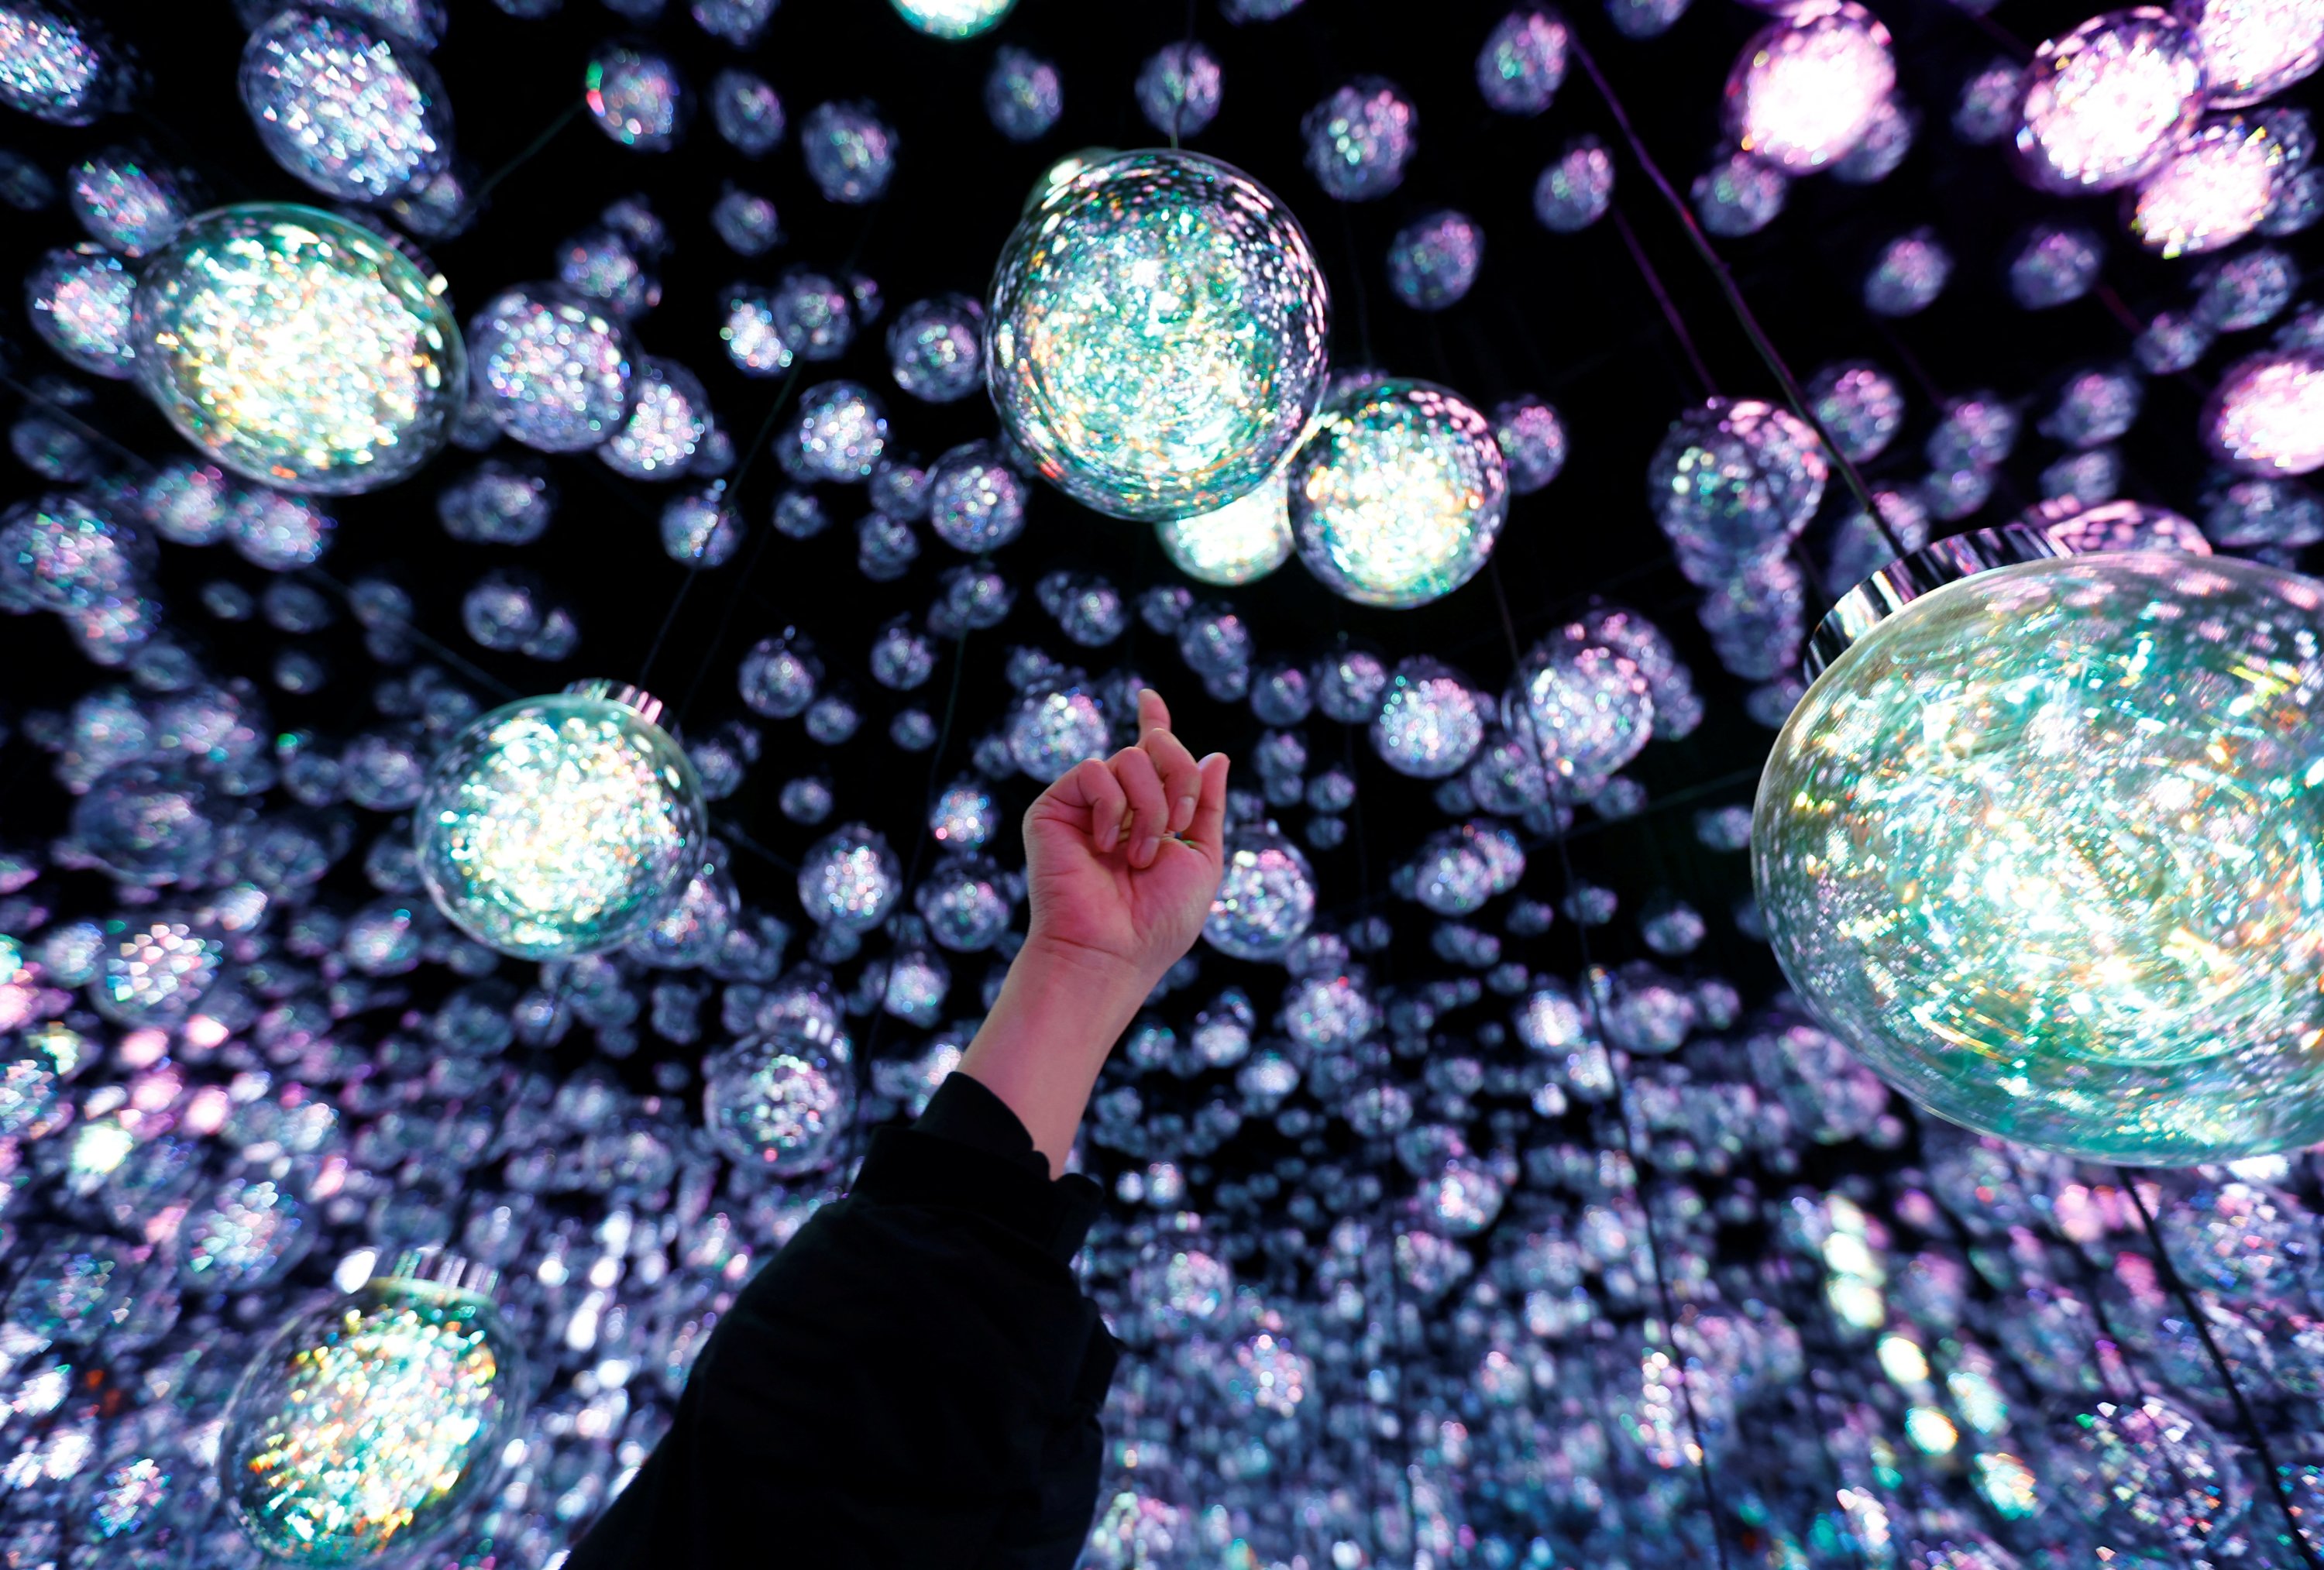 A member of the teamLab digital art group explains about an installation in preparation for the reopening of their Borderless museum in February at the Azabudai Hills complex in Tokyo, Japan, Nov. 17, 2023. (Reuters Photo)